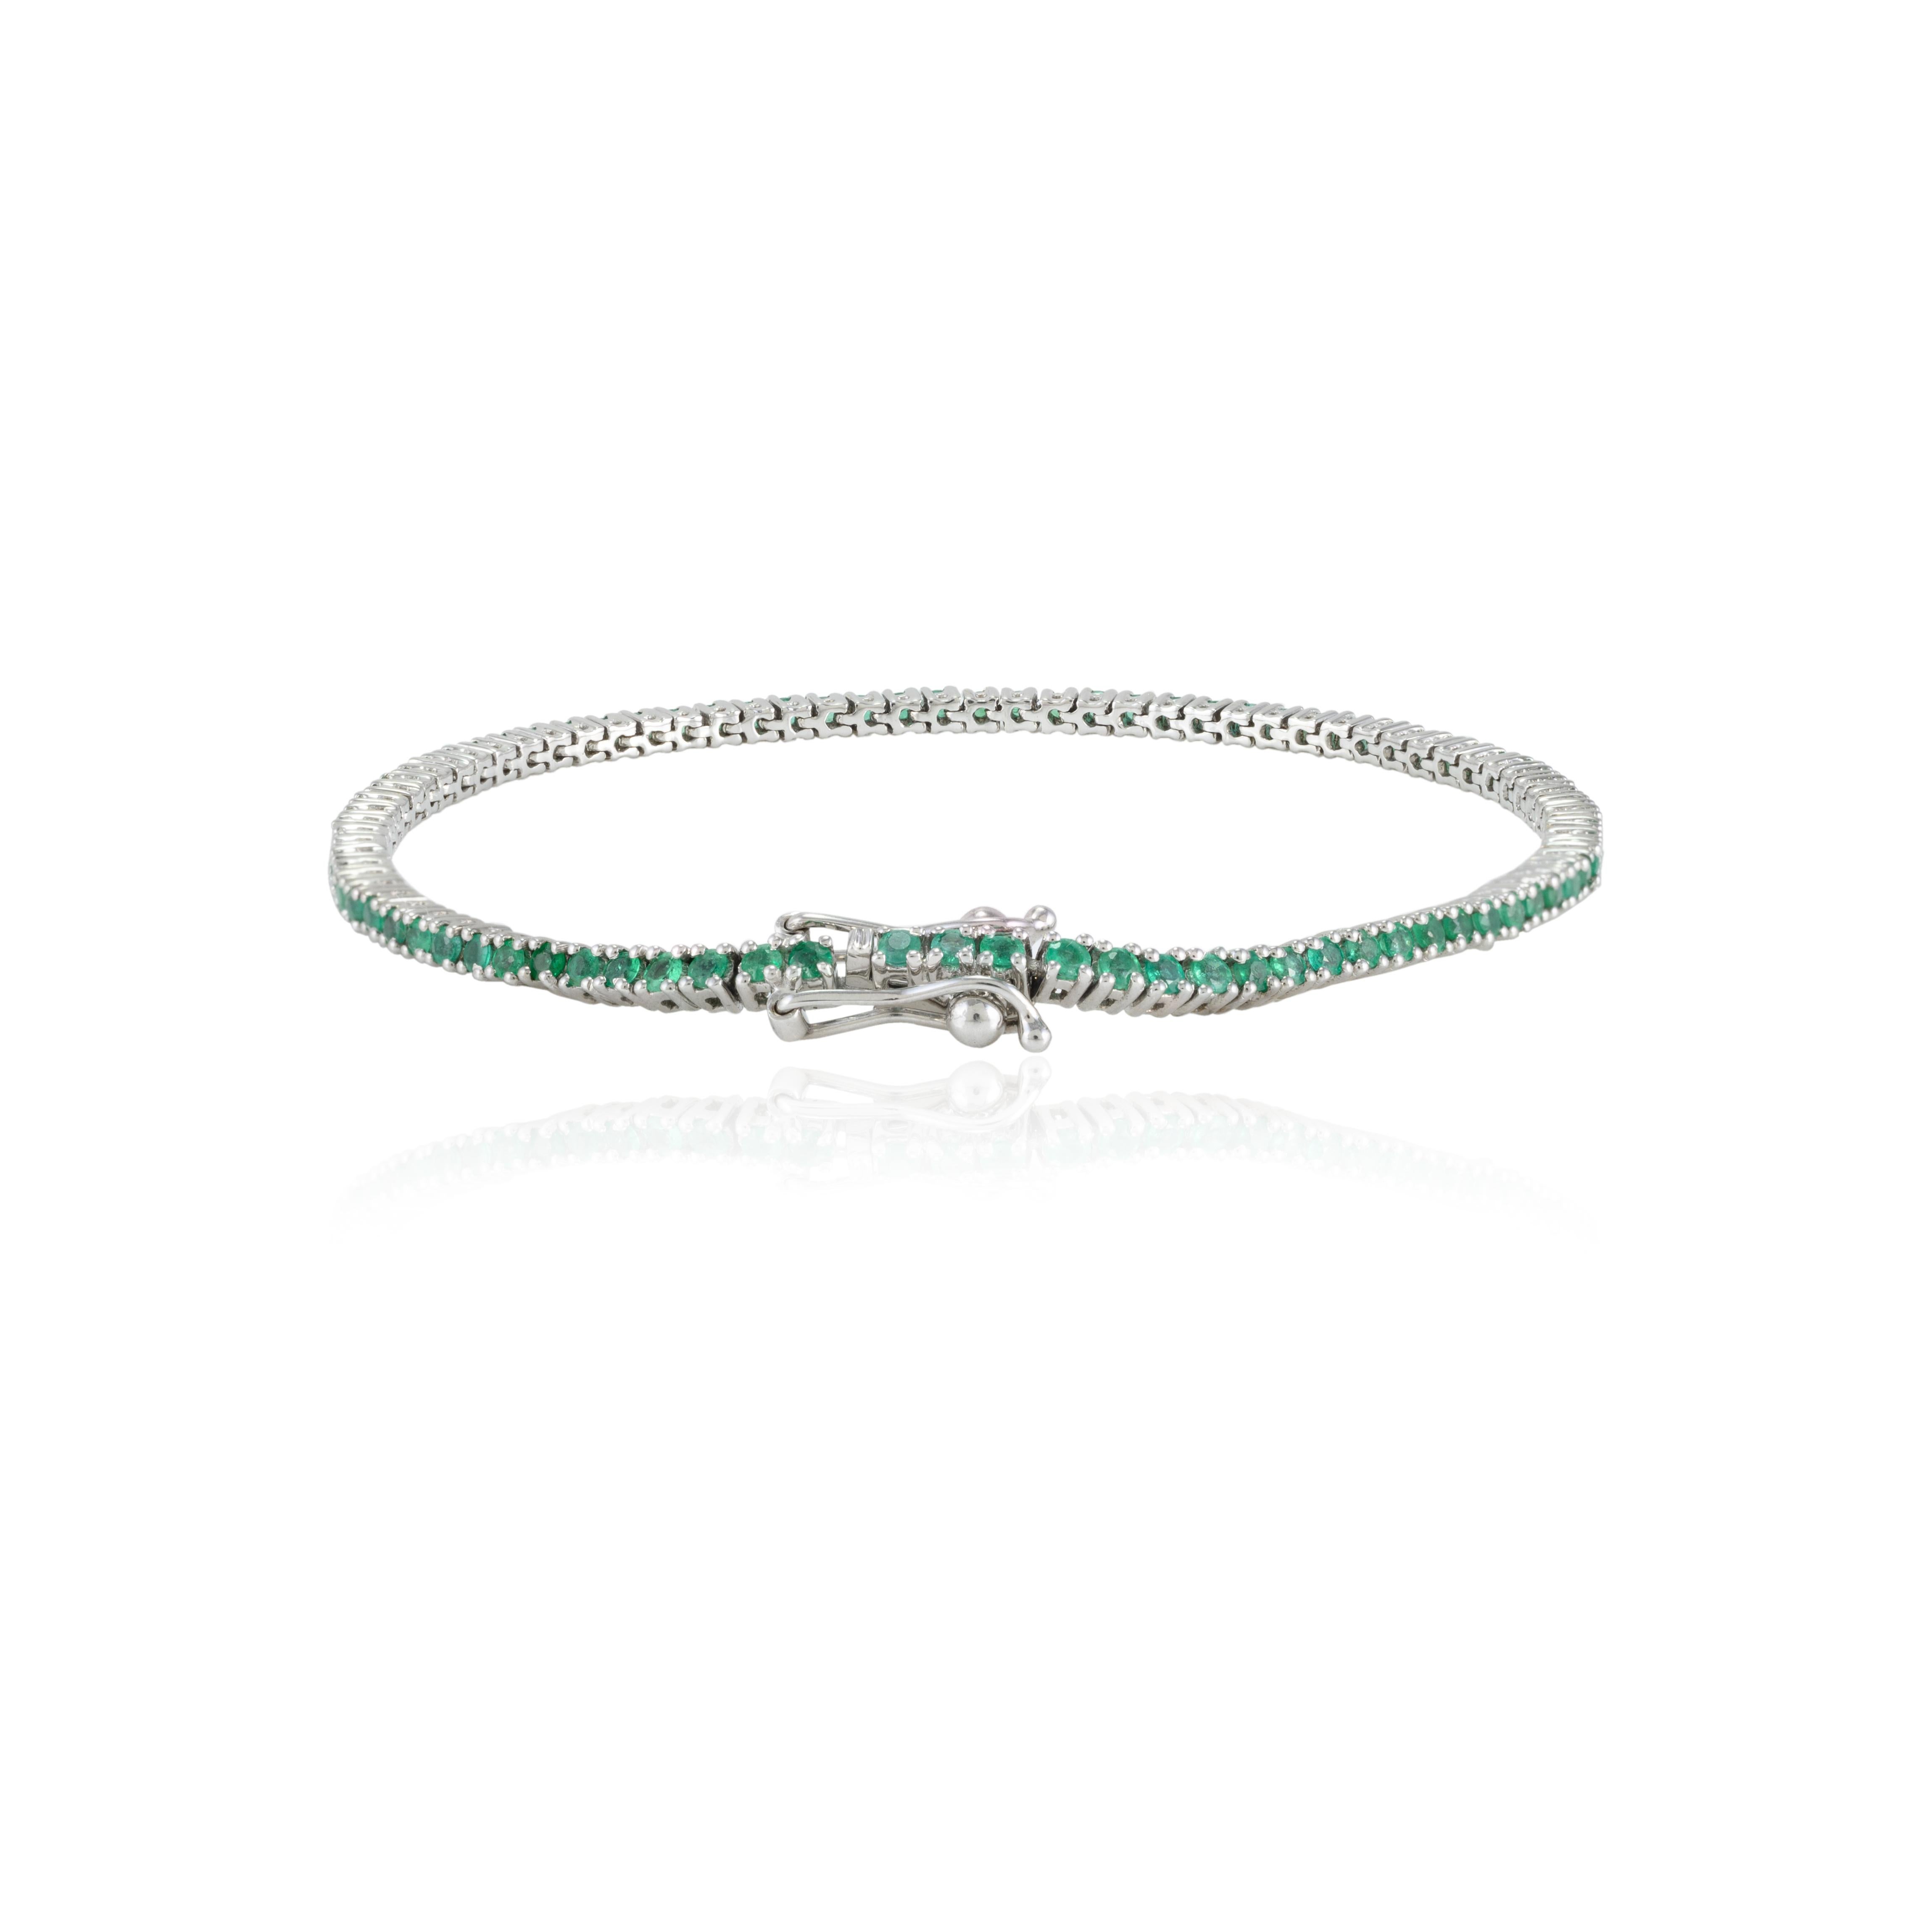 2.1 Carat Dainty Emerald May Birthstone Sleek Tennis Bracelet in 18k White Gold In New Condition For Sale In Houston, TX